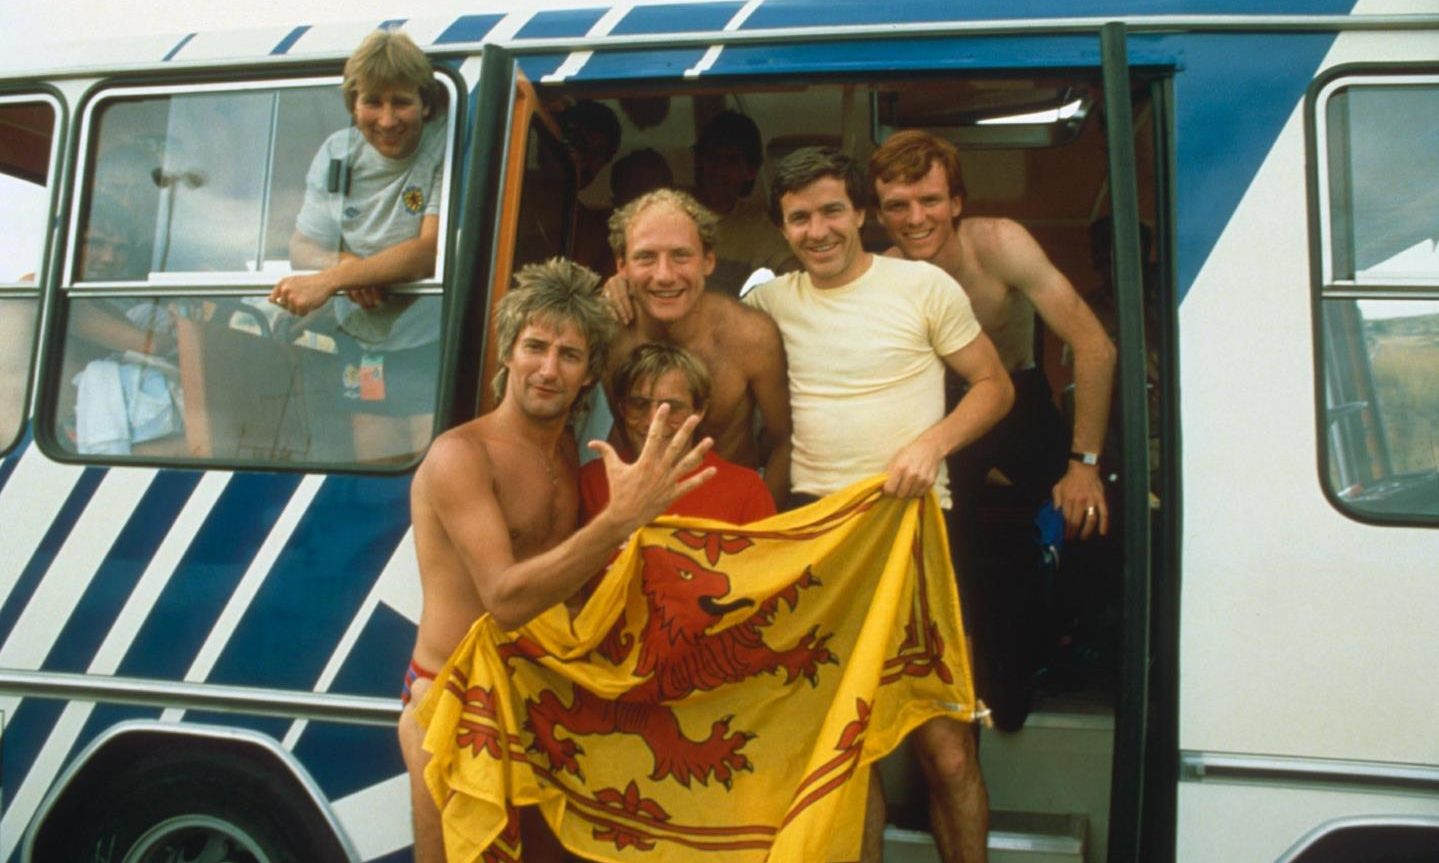 Rod Stewart joined the Scotland World Cup team in Spain in 1982